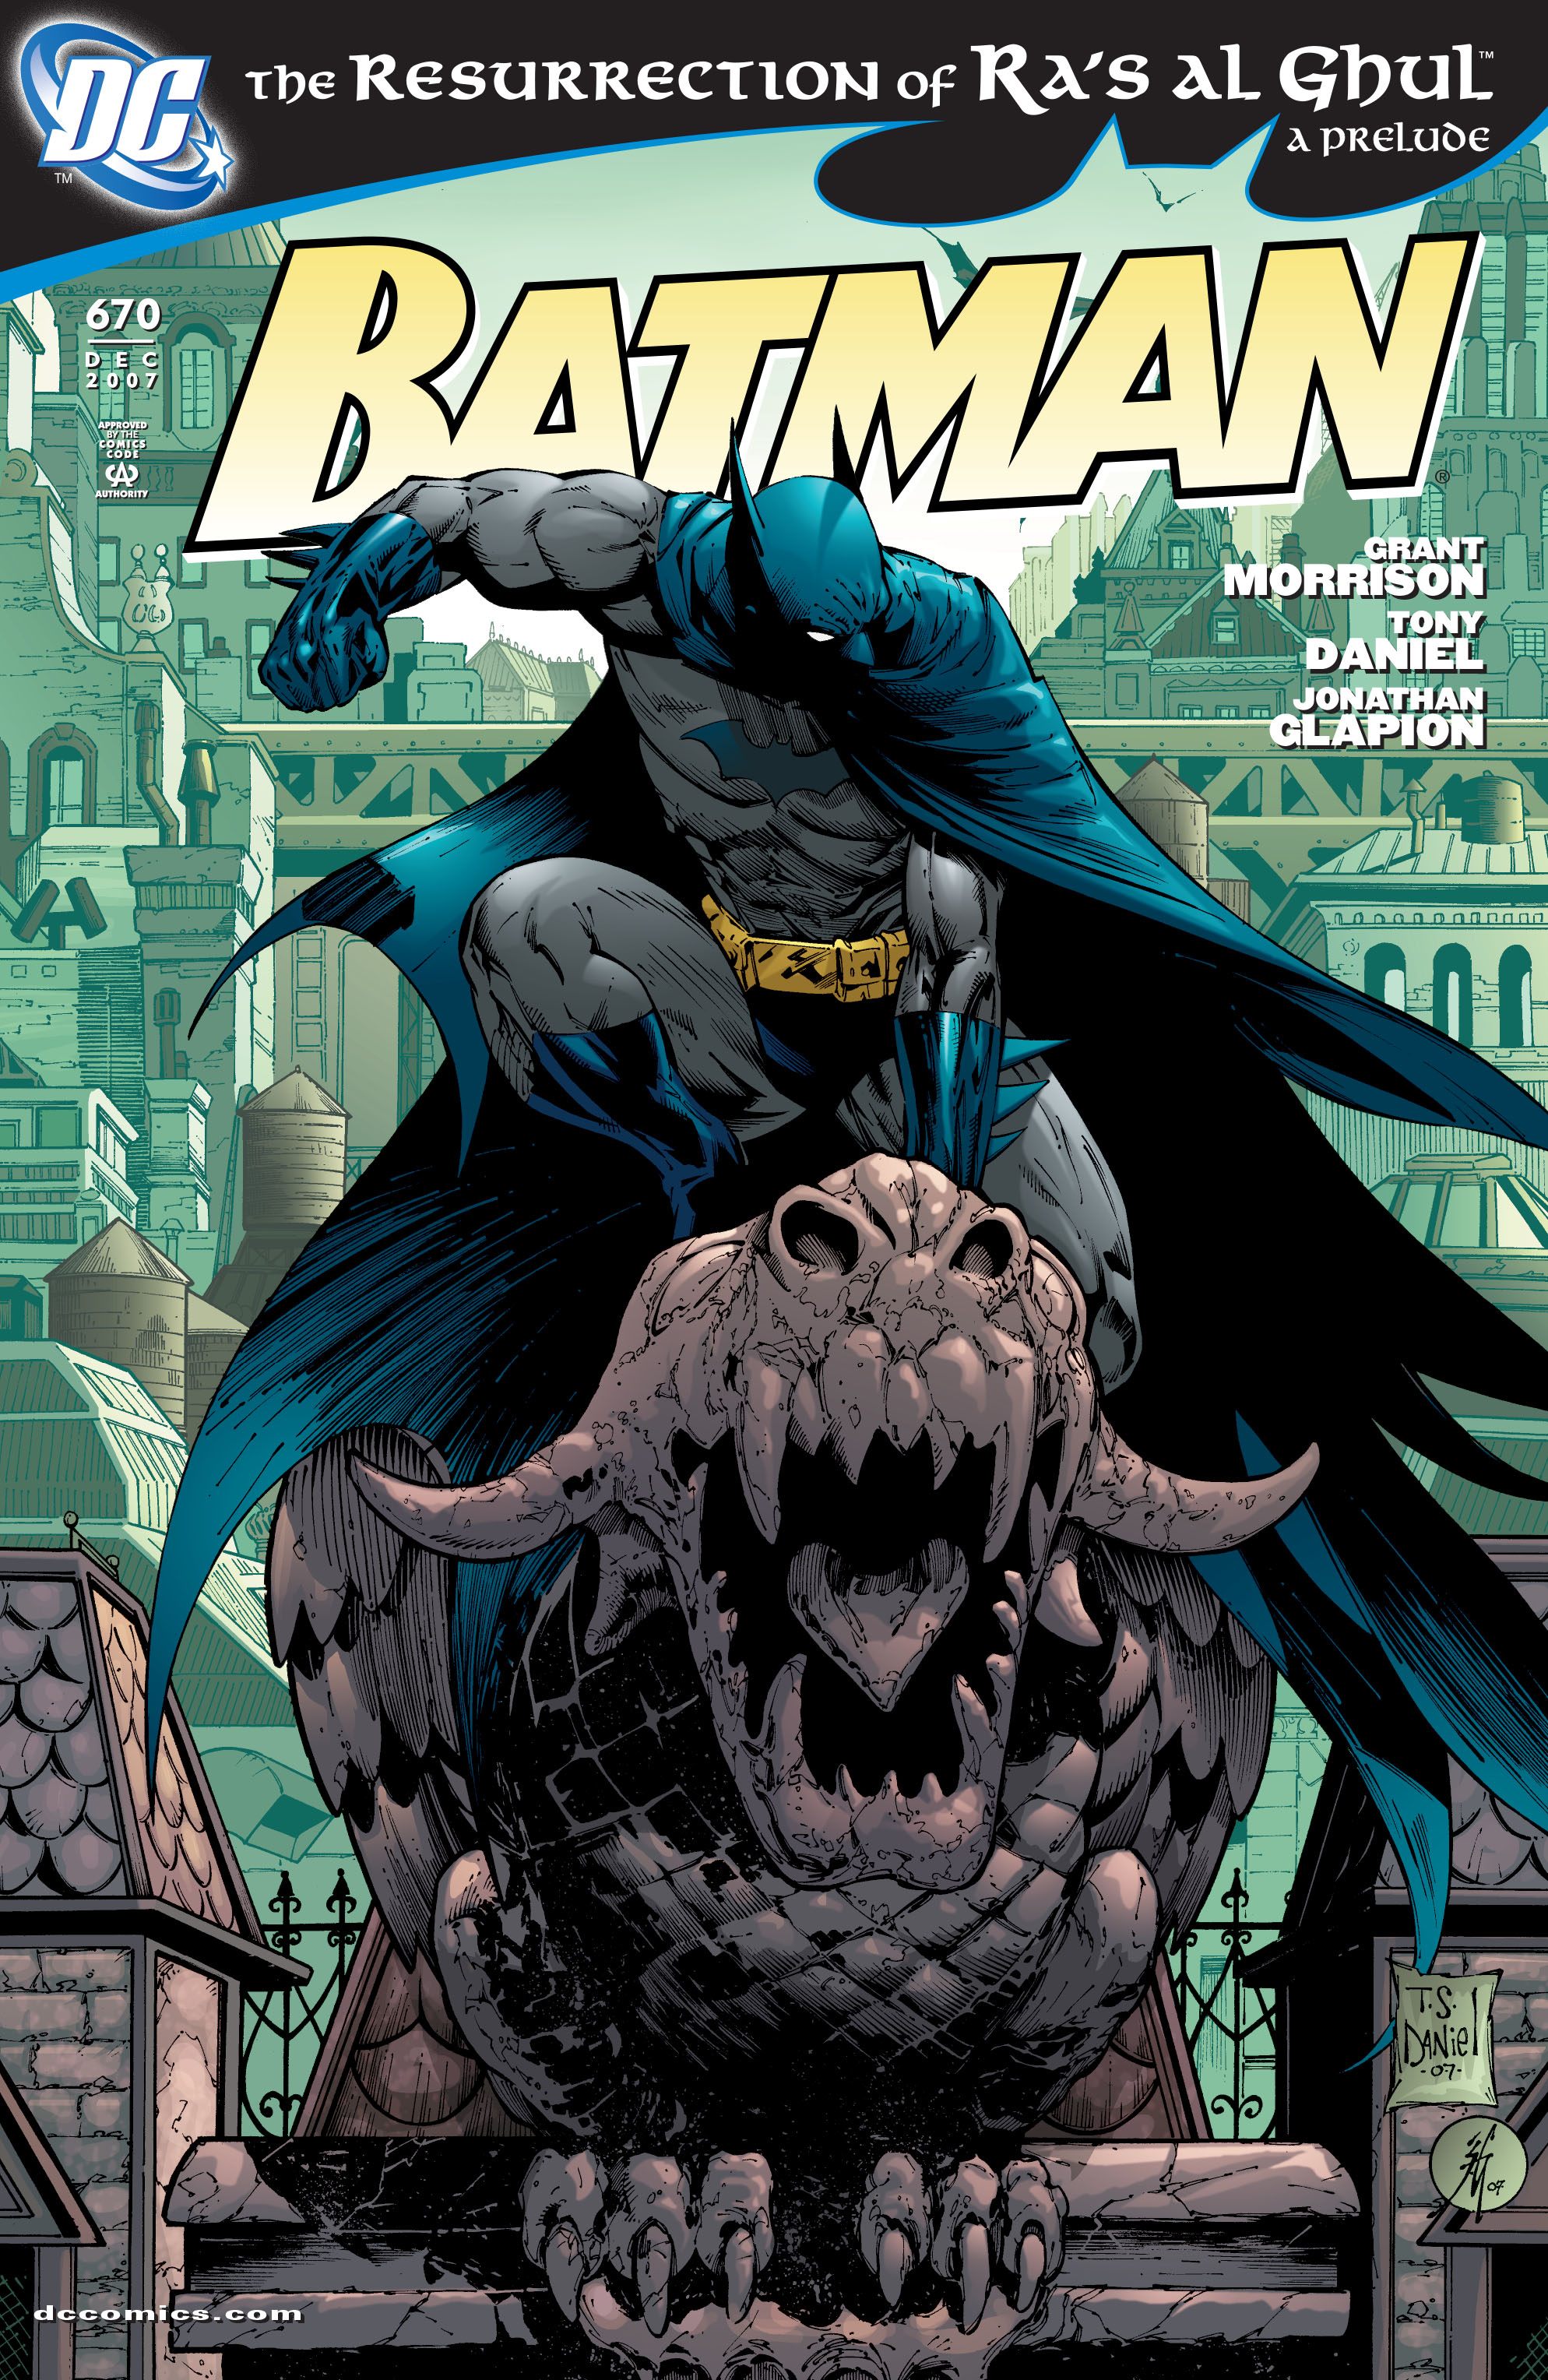 Batman 1940 Issue 670 | Read Batman 1940 Issue 670 comic online in high  quality. Read Full Comic online for free - Read comics online in high  quality .|